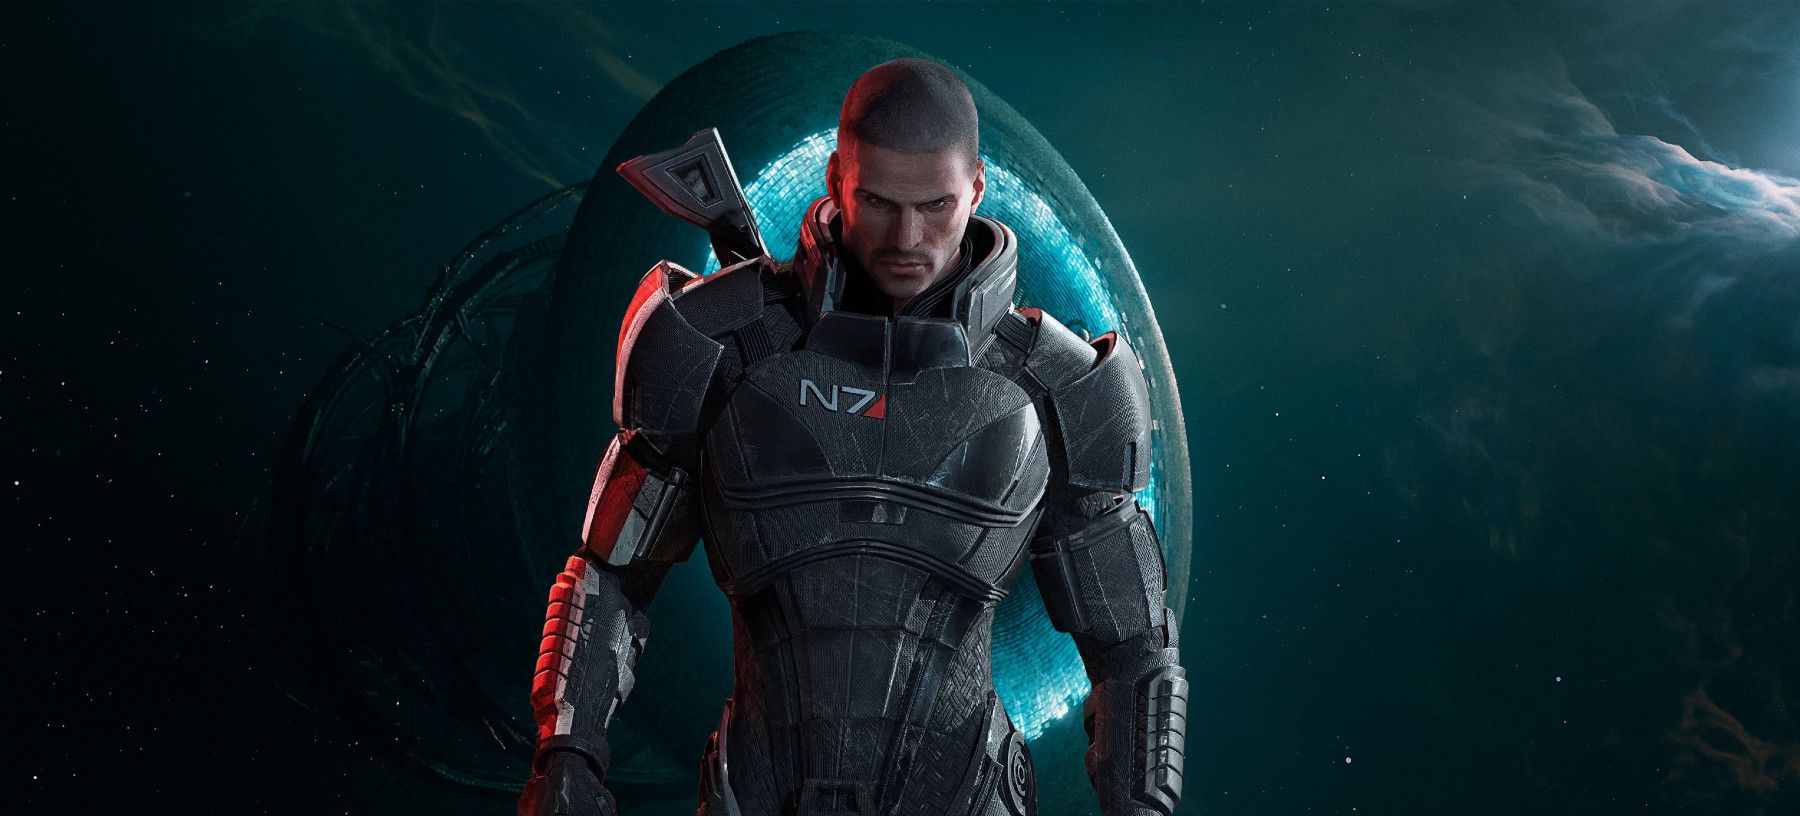 amazon, microsoft, mass effect 4 shouldn't be in an arms race with another upcoming sci-fi game